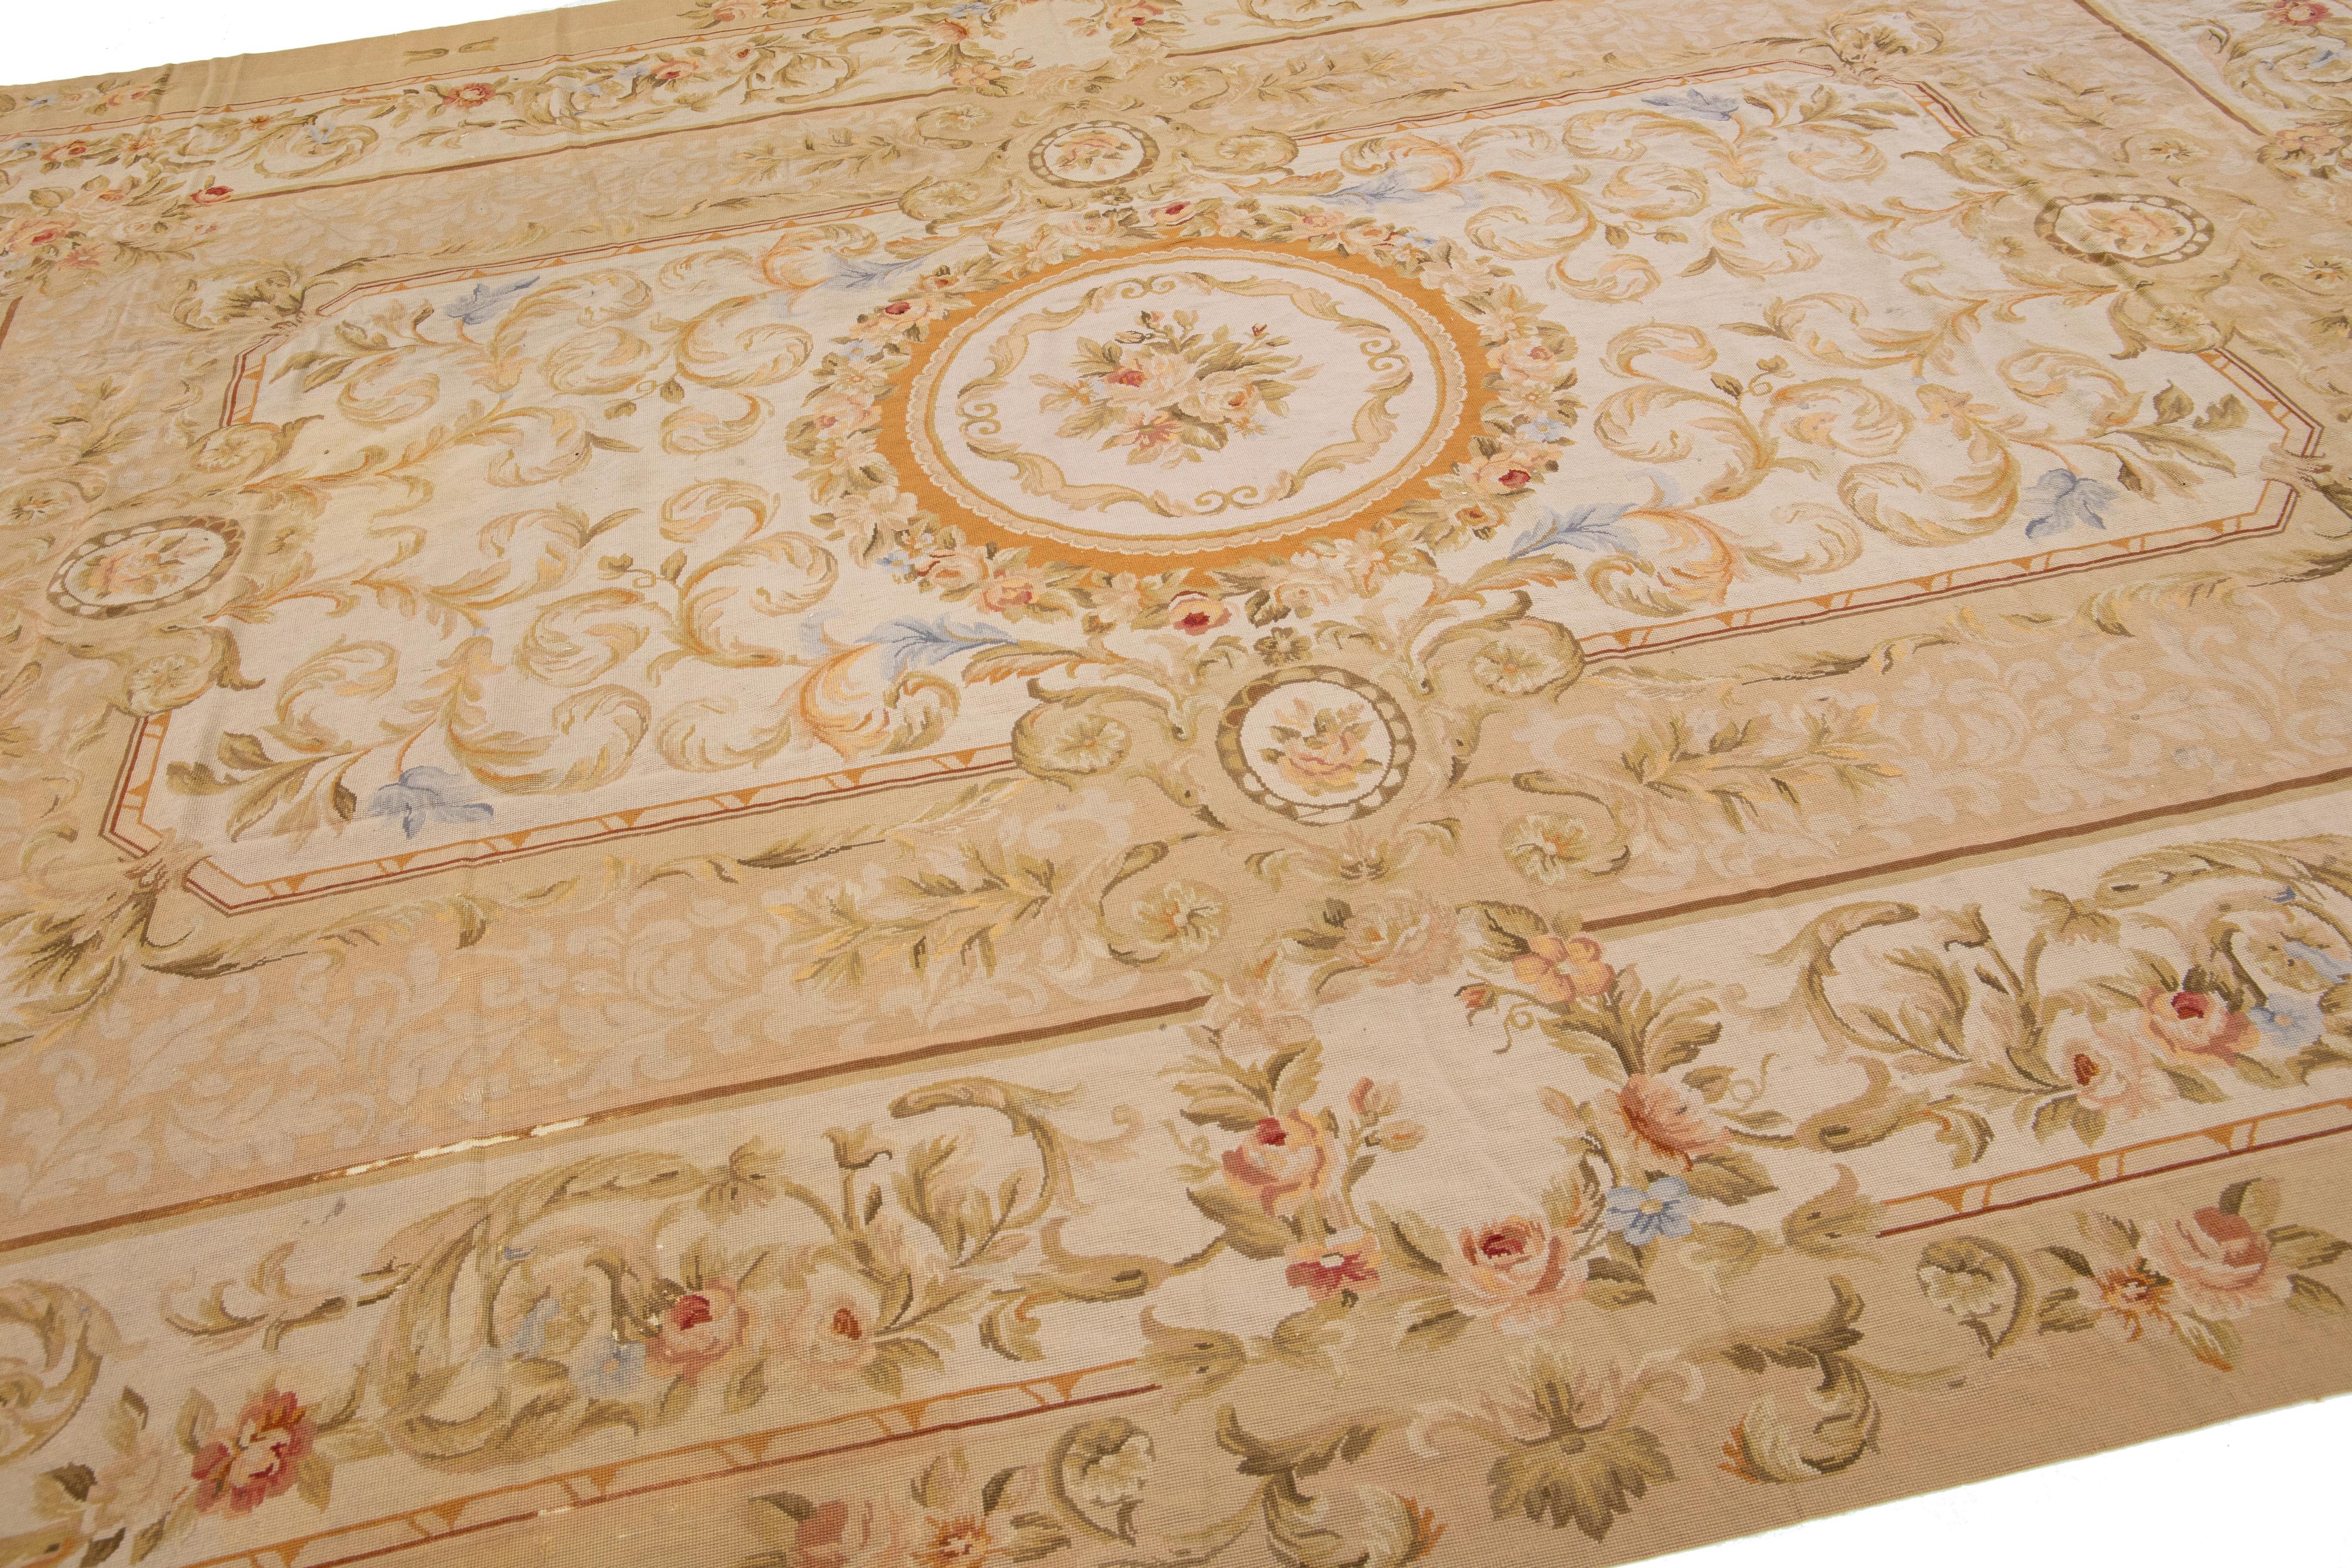 Vintage Portuguese Aubusson Needlepoint Wool Rug In Beige With Rosette Motif In Excellent Condition For Sale In Norwalk, CT